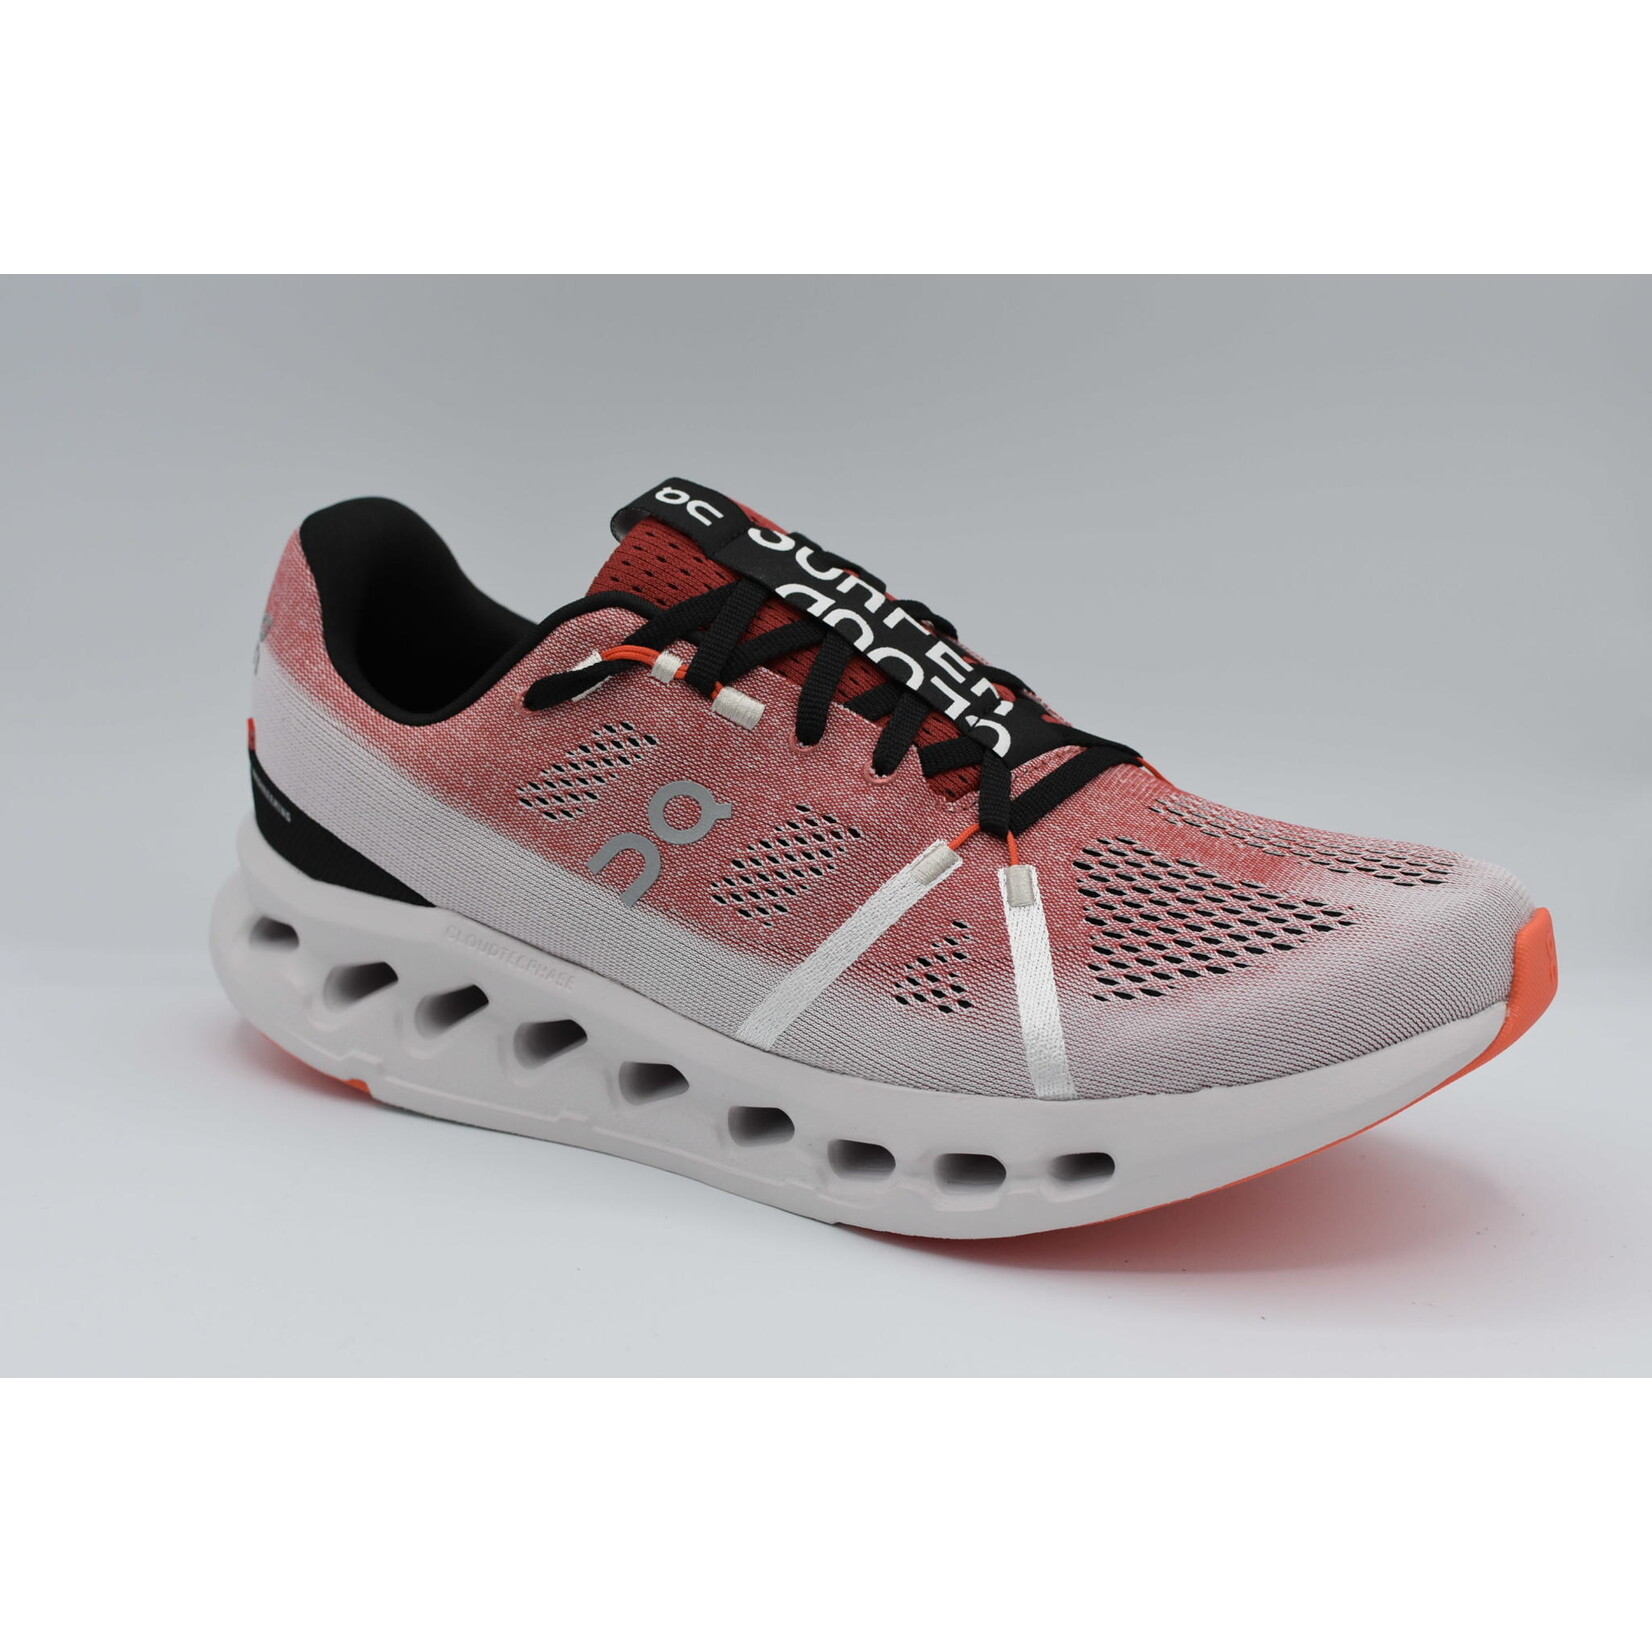 On's new Cloudsurfer performance running shoe now in SA – Tifosi